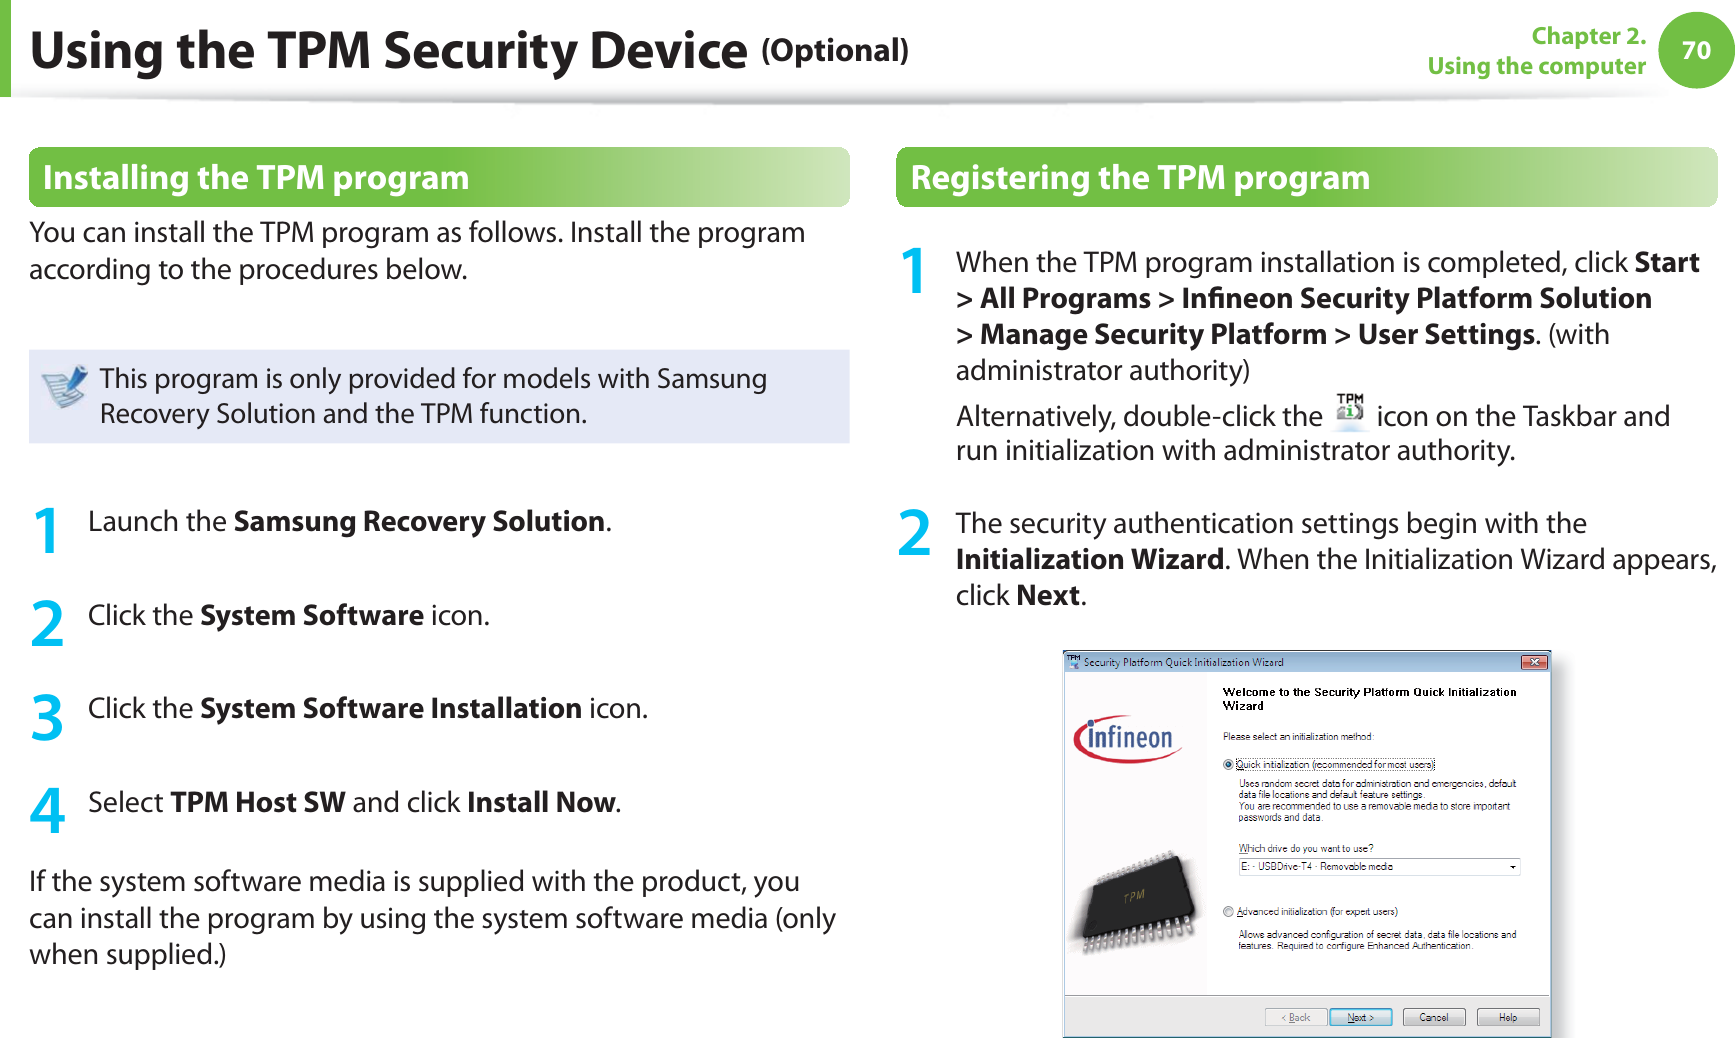 70Chapter 2. Using the computerInstalling the TPM programYou can install the TPM program as follows. Install the program according to the procedures below. This program is only provided for models with Samsung Recovery Solution and the TPM function.1 Launch the Samsung Recovery Solution.2 Click the System Software icon.3 Click the System Software Installation icon.4 Select TPM Host SW and click Install Now.If the system software media is supplied with the product, you can install the program by using the system software media (only when supplied.)Registering the TPM program1  When the TPM program installation is completed, click Start &gt; All Programs &gt; In neon Security Platform Solution &gt; Manage Security Platform &gt; User Settings. (with administrator authority) Alternatively, double-click the   icon on the Taskbar and run initialization with administrator authority.2  The security authentication settings begin with the Initialization Wizard. When the Initialization Wizard appears, click Next. Using the TPM Security Device (Optional)